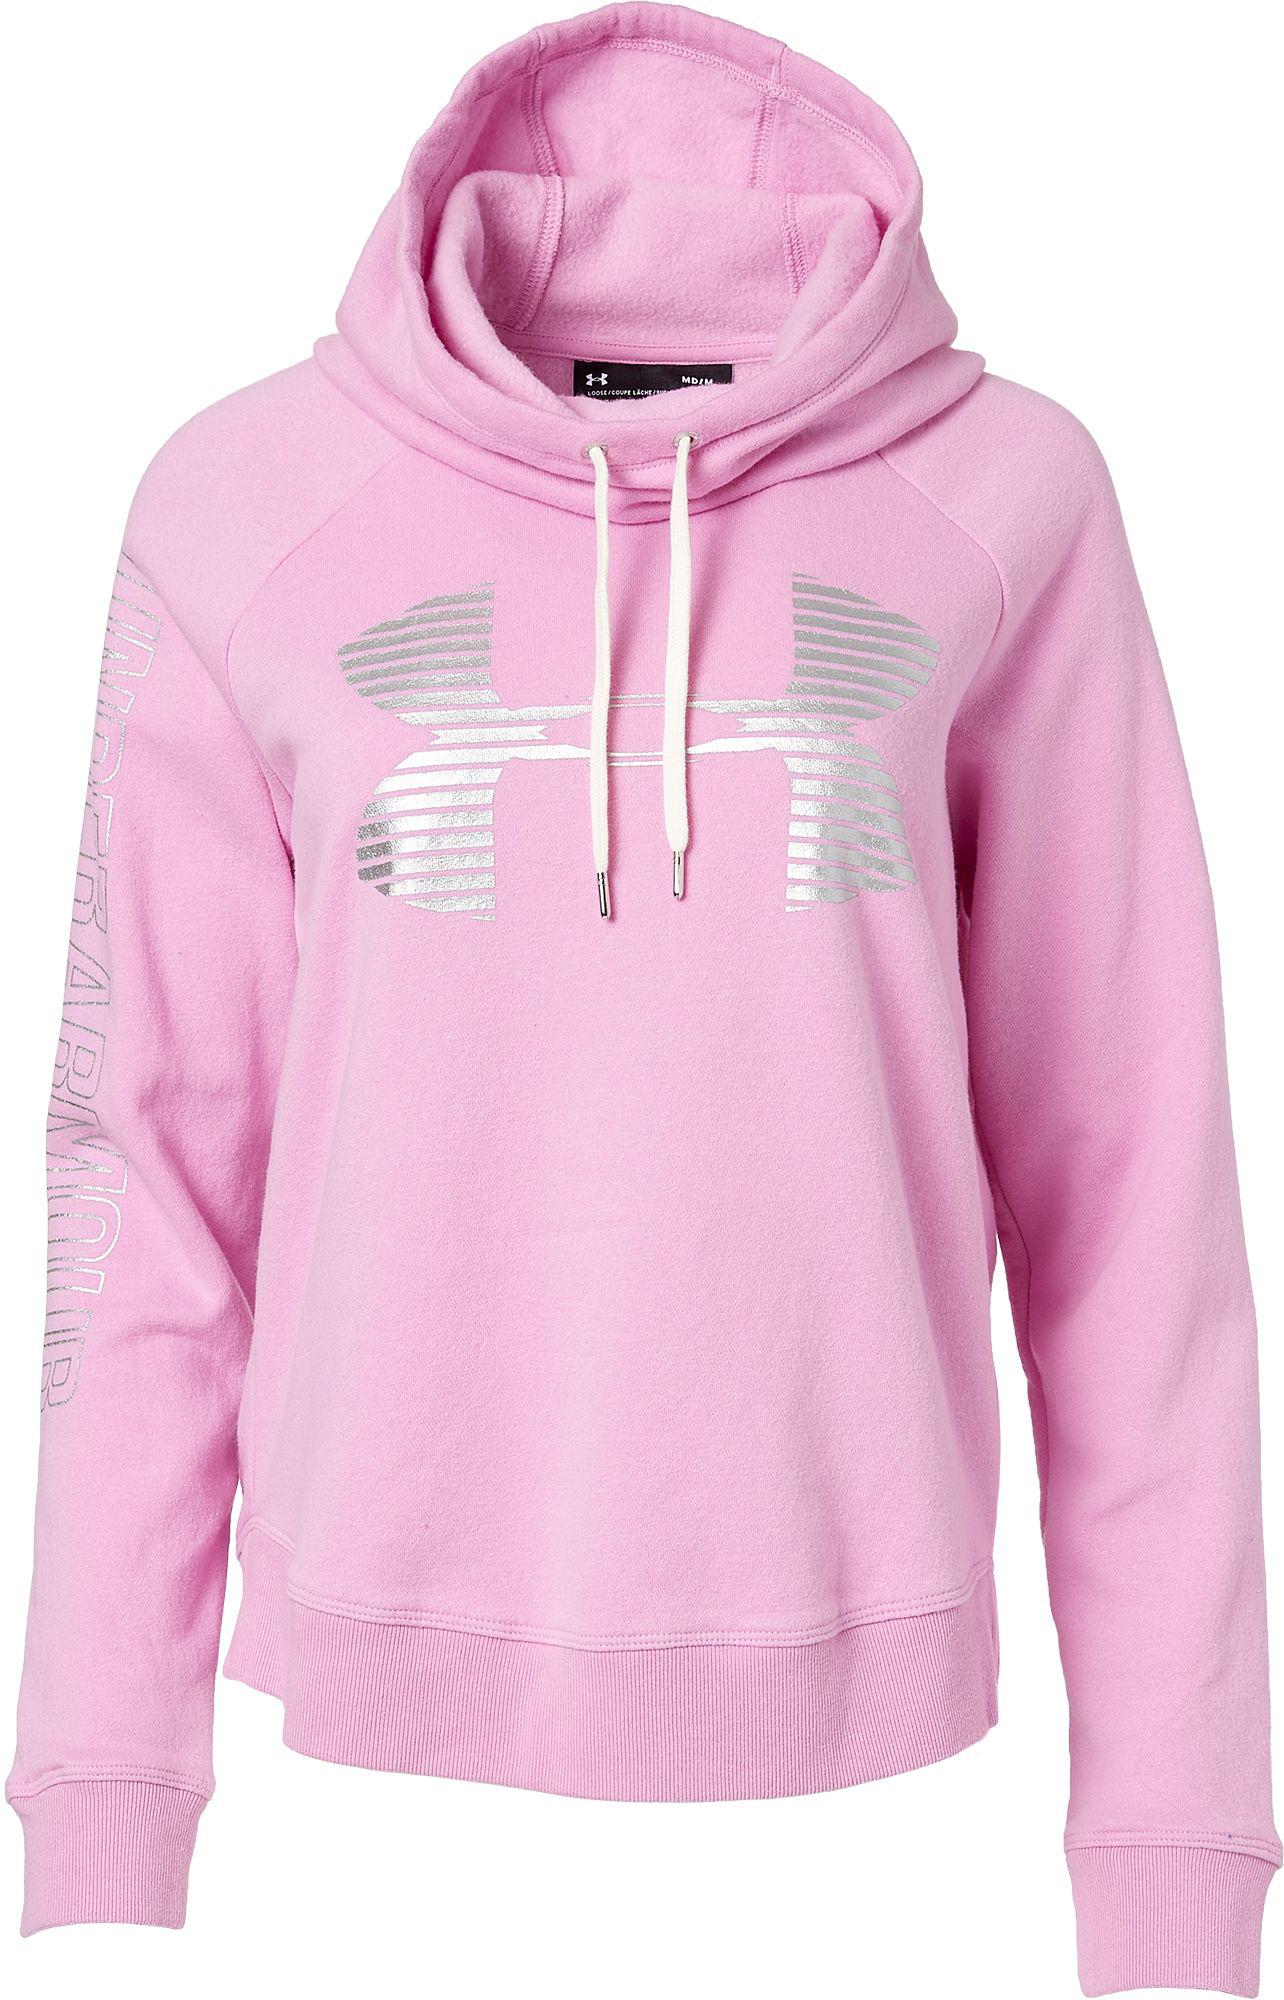 black under armour hoodie with pink logo